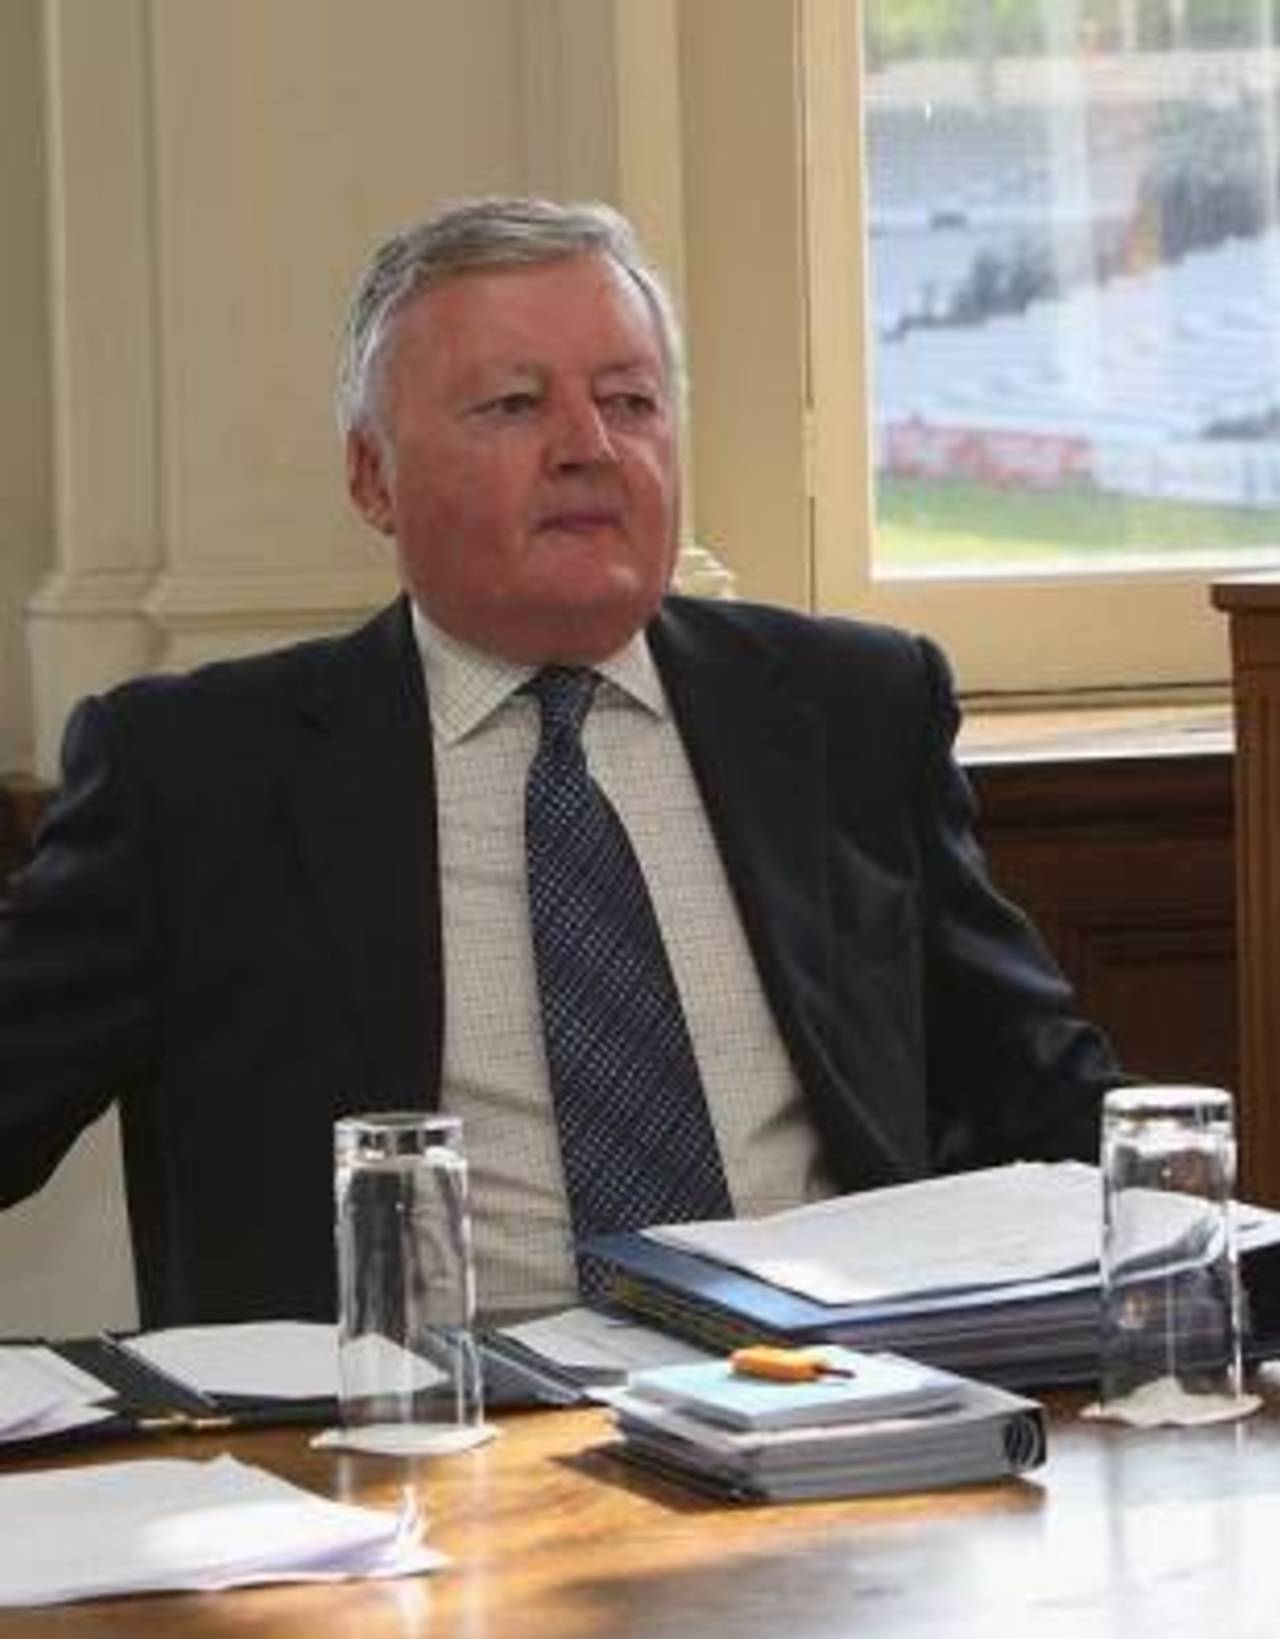 David Morgan, the ICC president, at the high-level discussions at Lord's, May 11, 2009